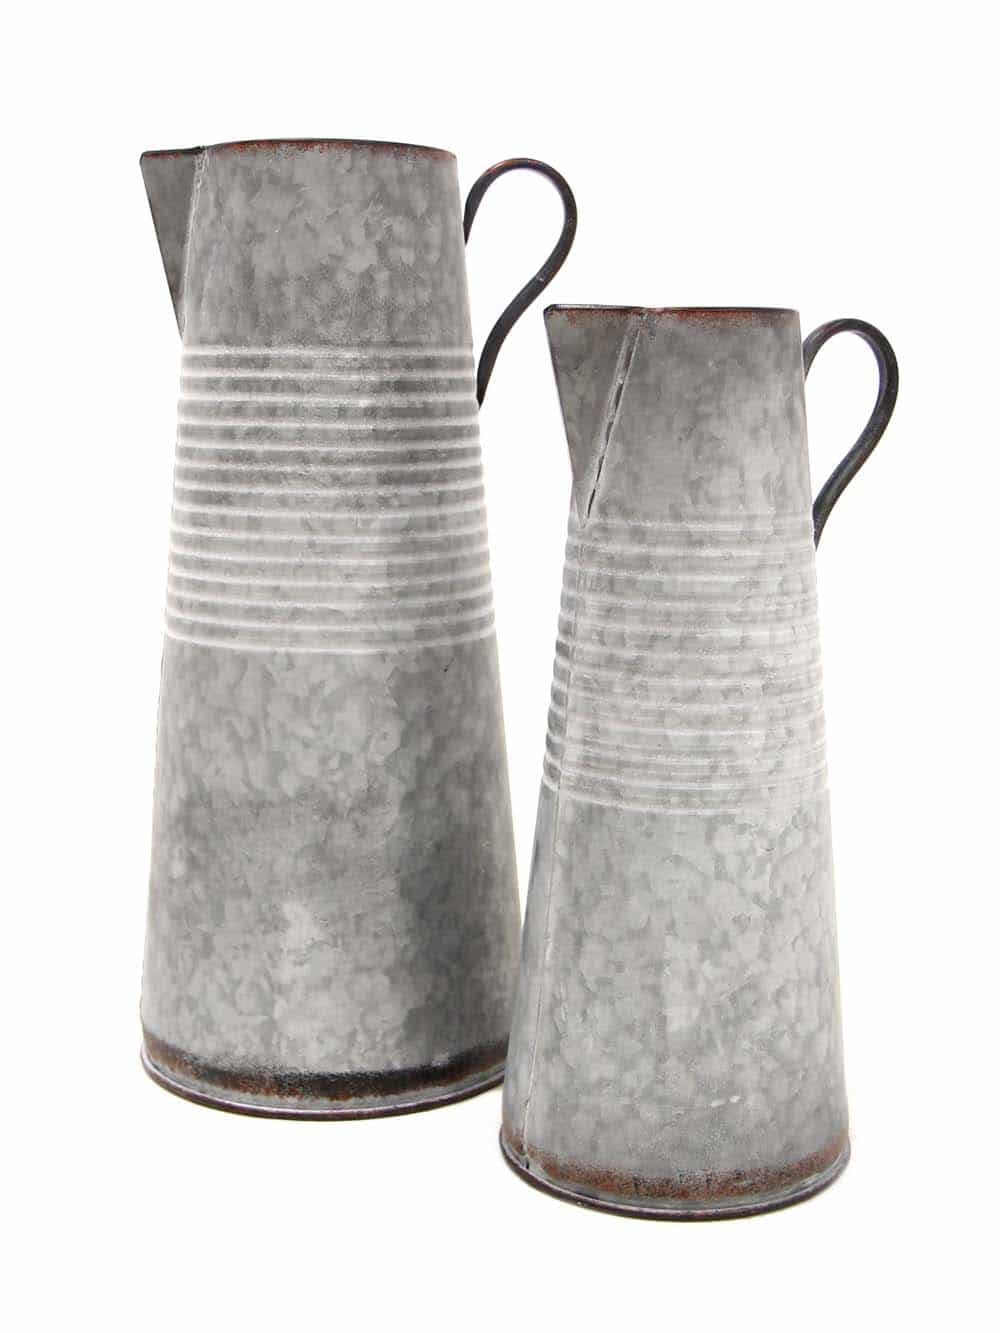 Pitcher - Galvanised (Small)